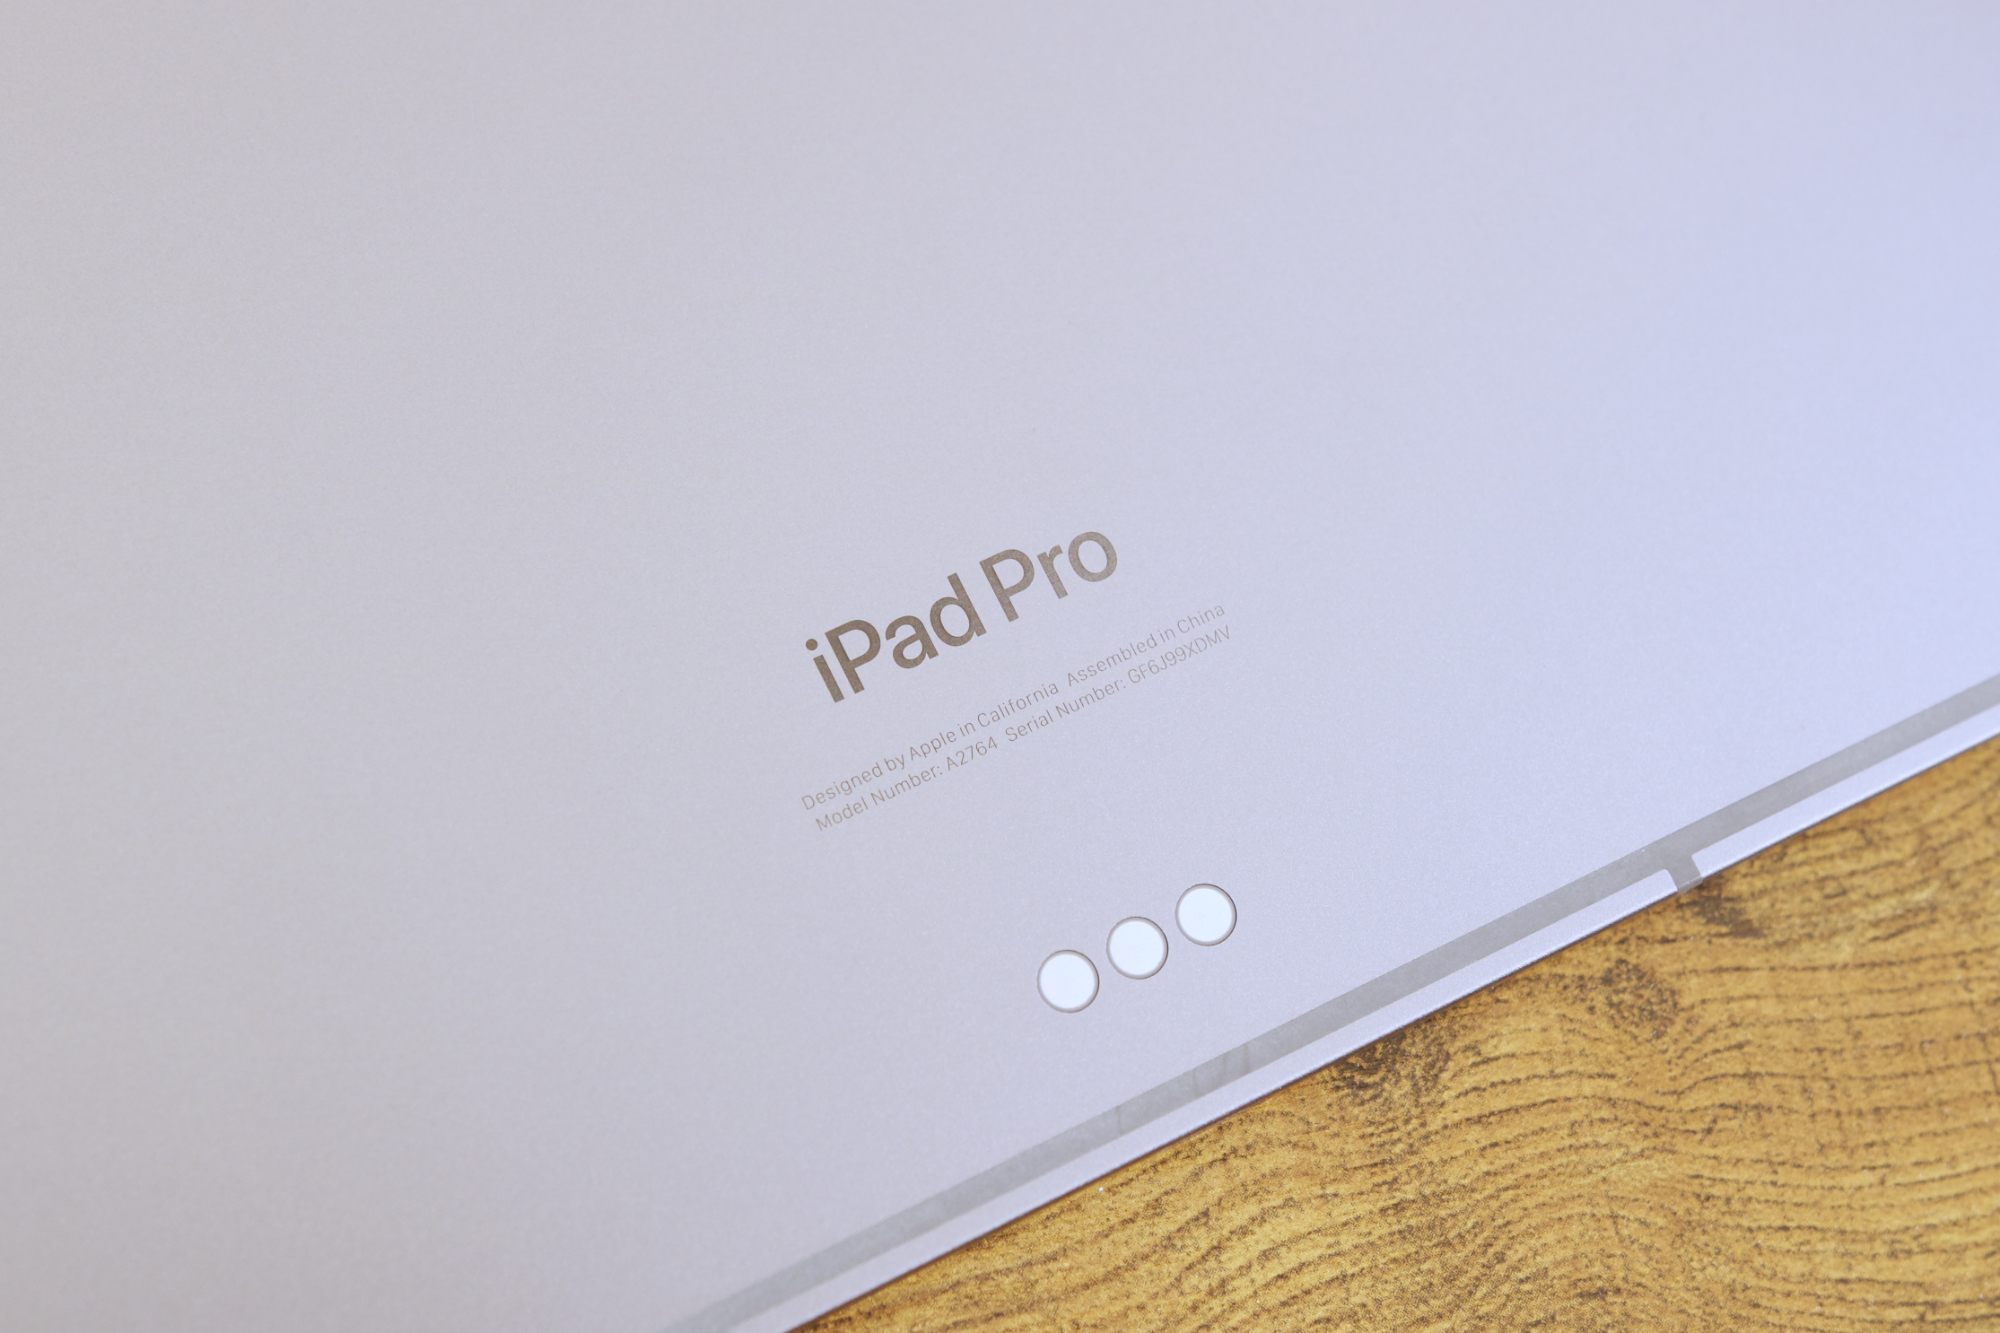 2021 12.9-inch iPad Pro review: Pro hardware without Apple's pro software